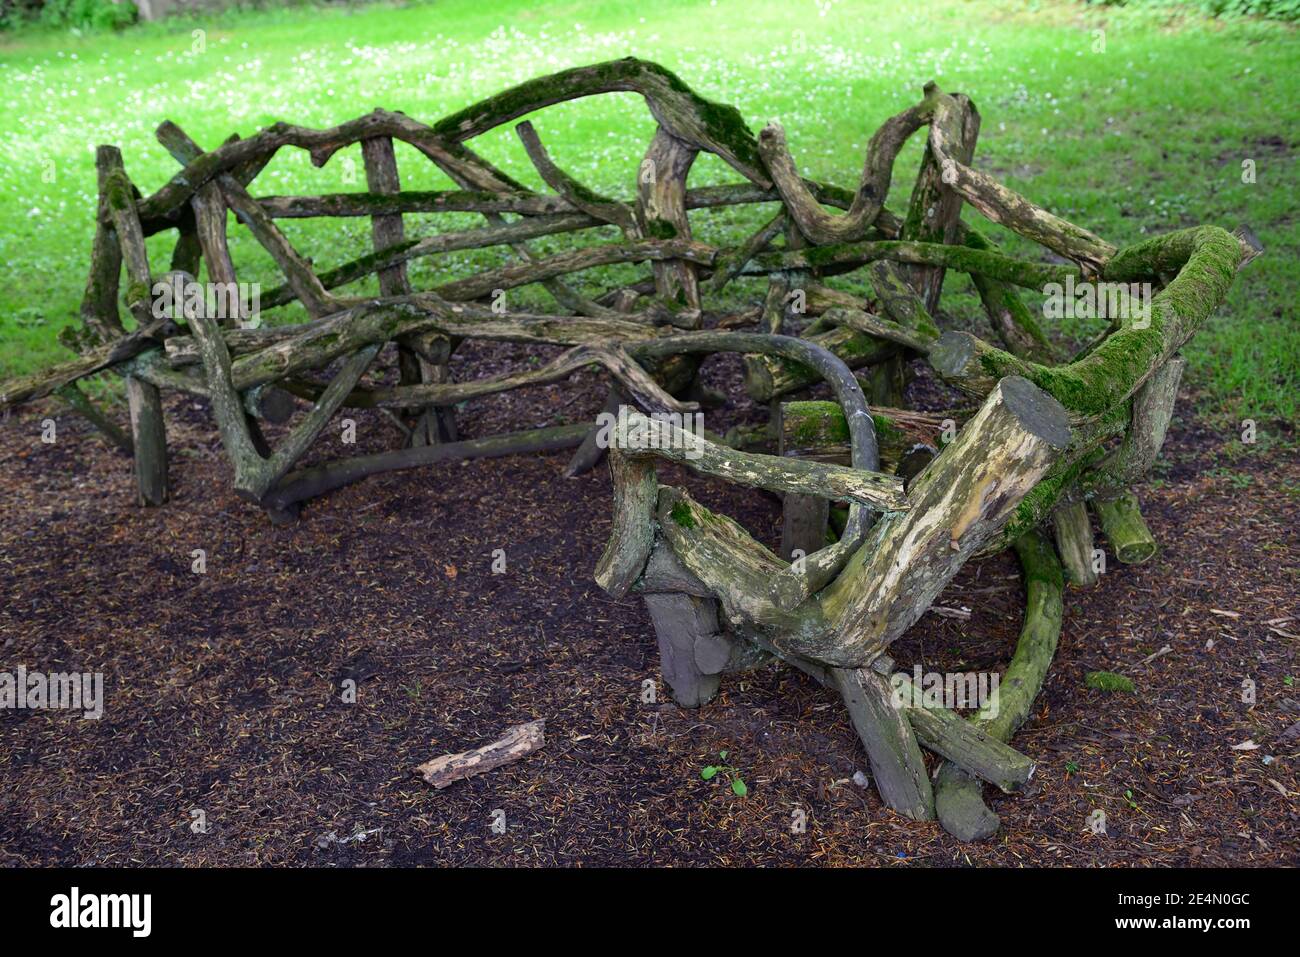 wooden,wood,garden bench,garden seating,seat made from tree branches, limbs,rustic furniture,outdoor,outdoor living,garden feature,gardens,garden furn Stock Photo